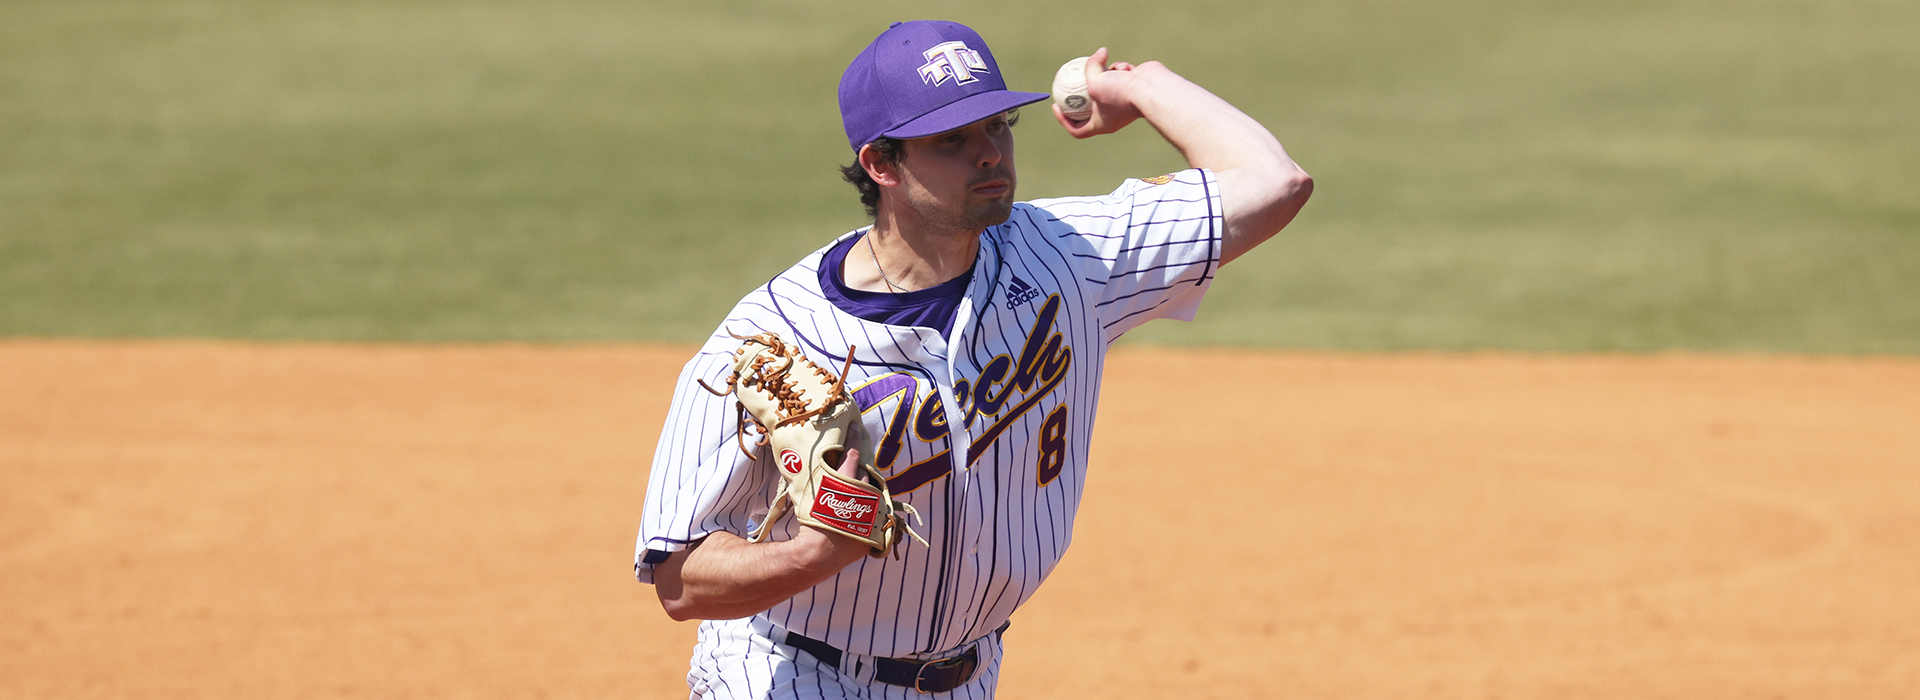 Tech holds off Morehead late, claims series finale 8-6